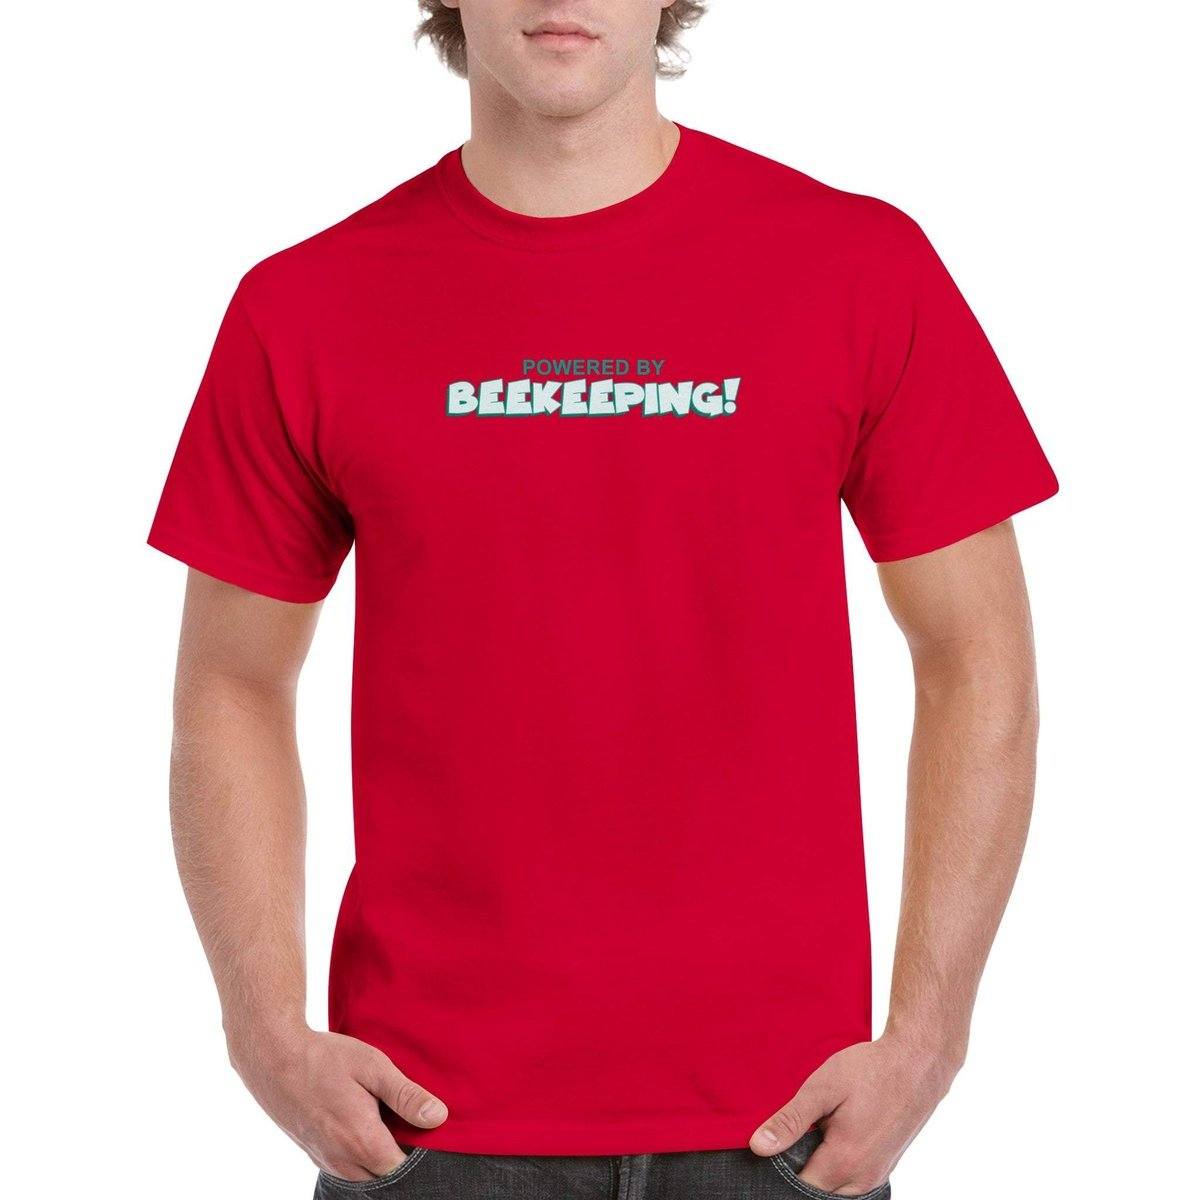 Powered By Beekeeping T-Shirt - funny beekeeper Tshirt - Unisex Crewneck T-shirt Australia Online Color Red / S